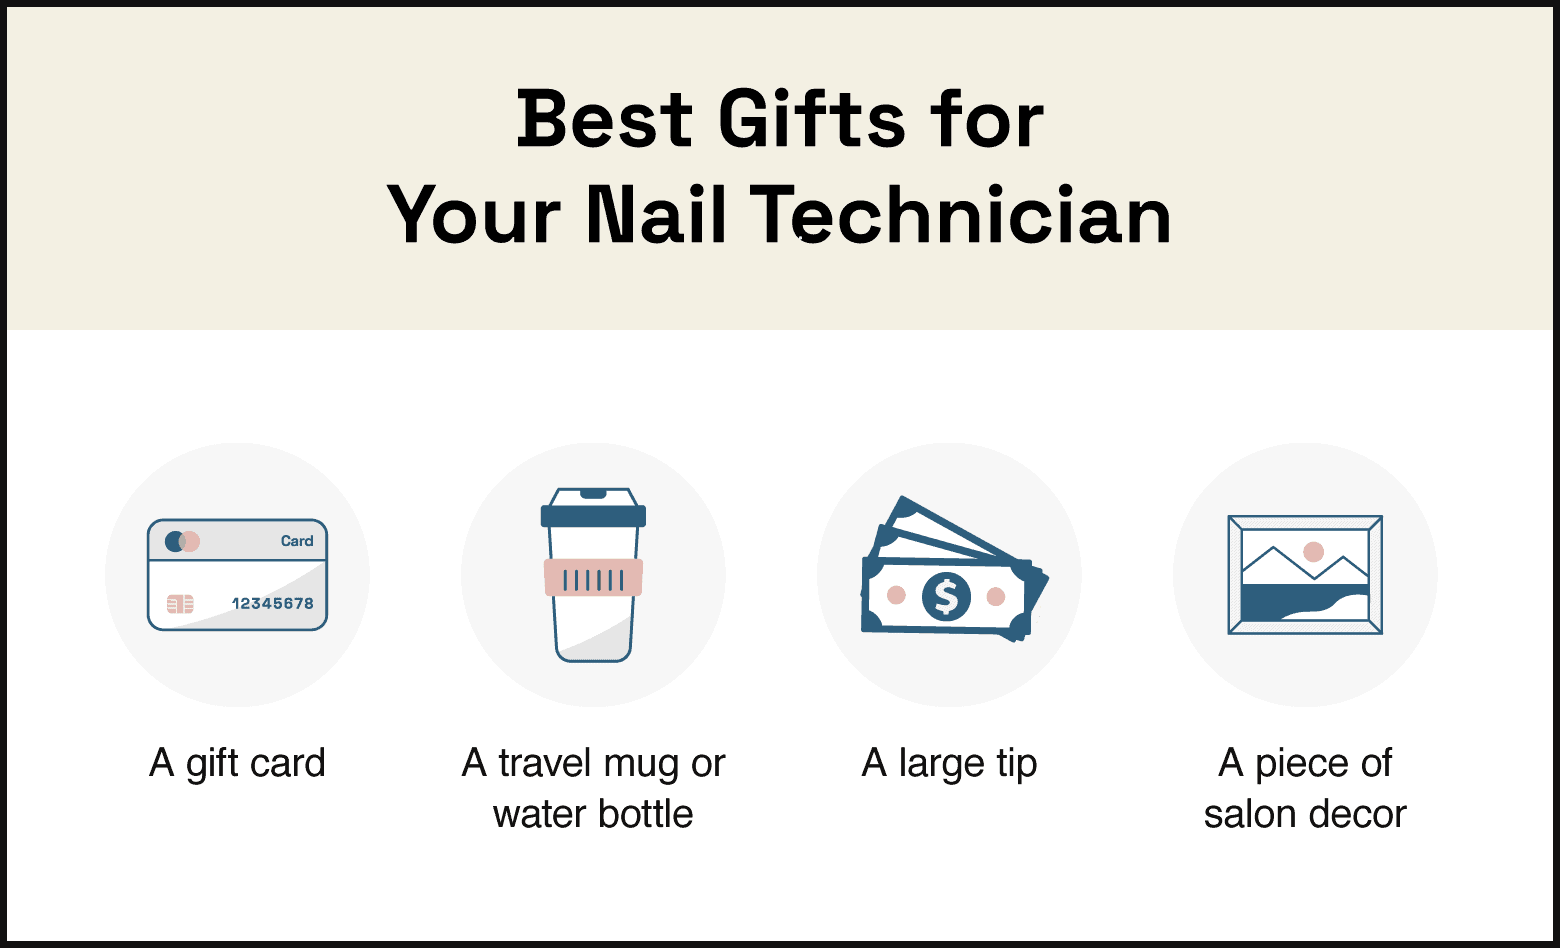 illustrations of the best gifts for a nail tech: gift card, travel mug or bottle, large tip, salon decor